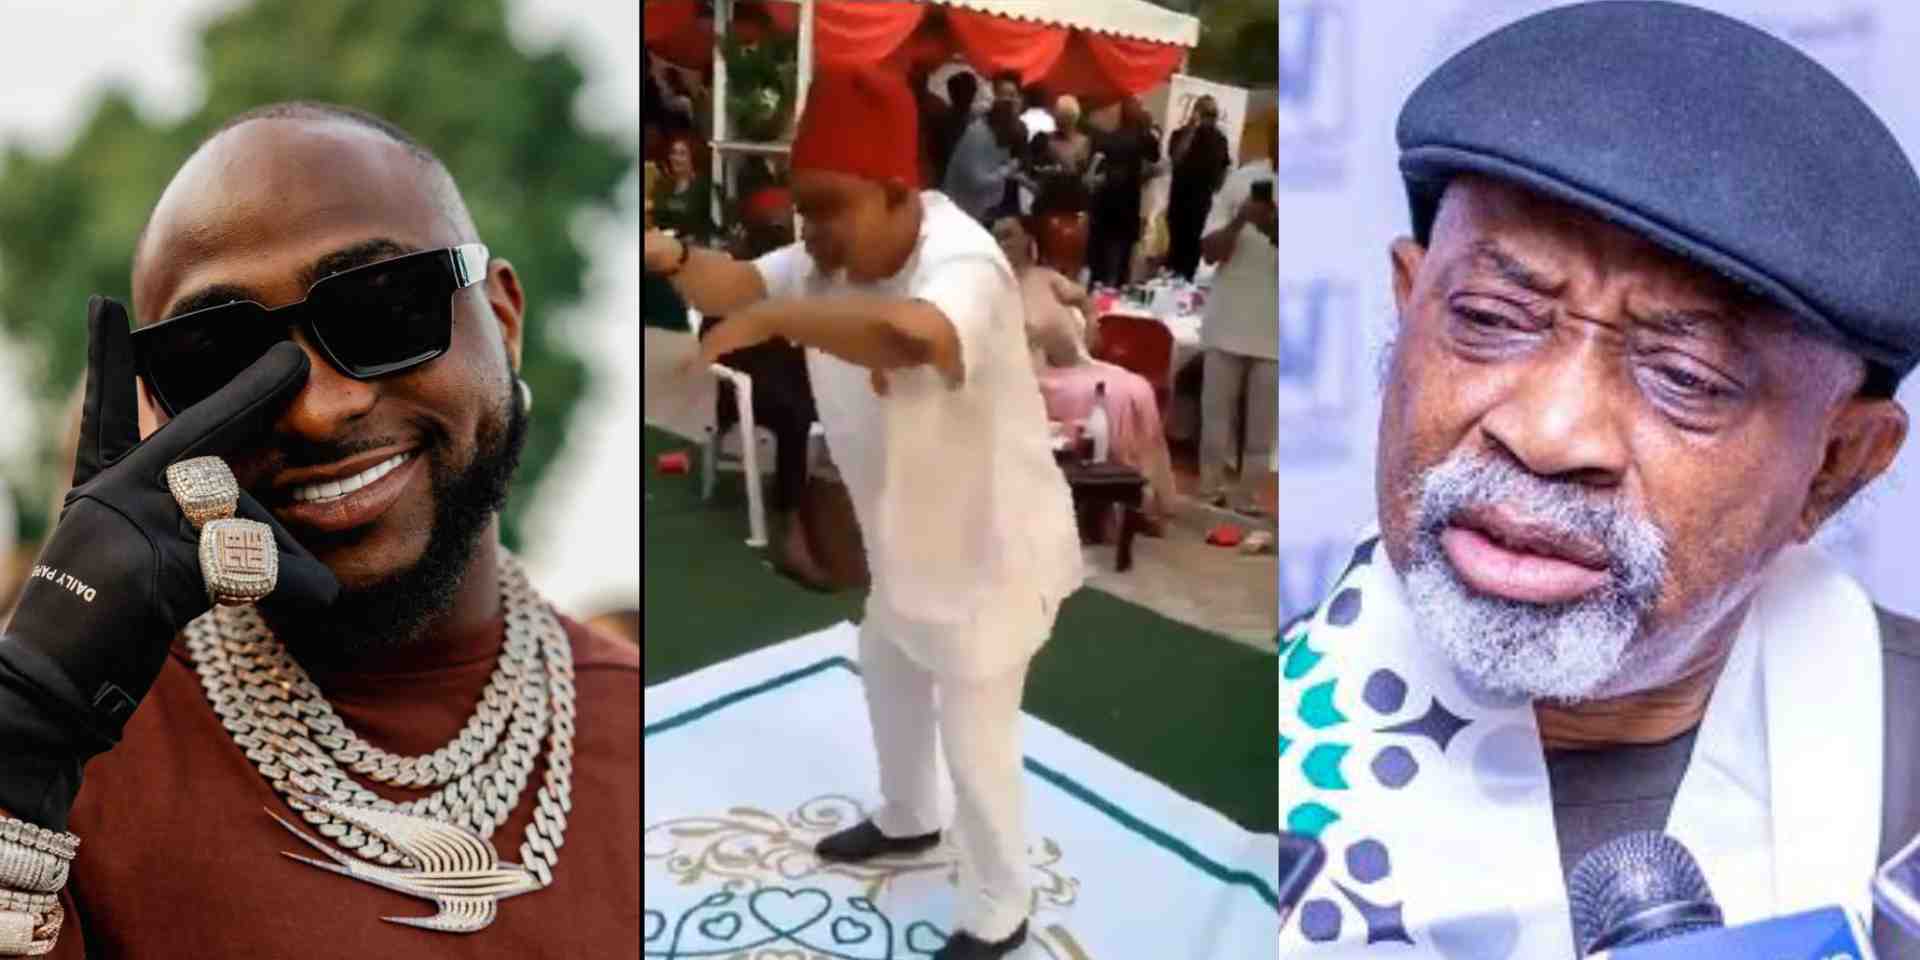 Davido reacts to a video of the labour minister, Chris Ngige dancing at an event